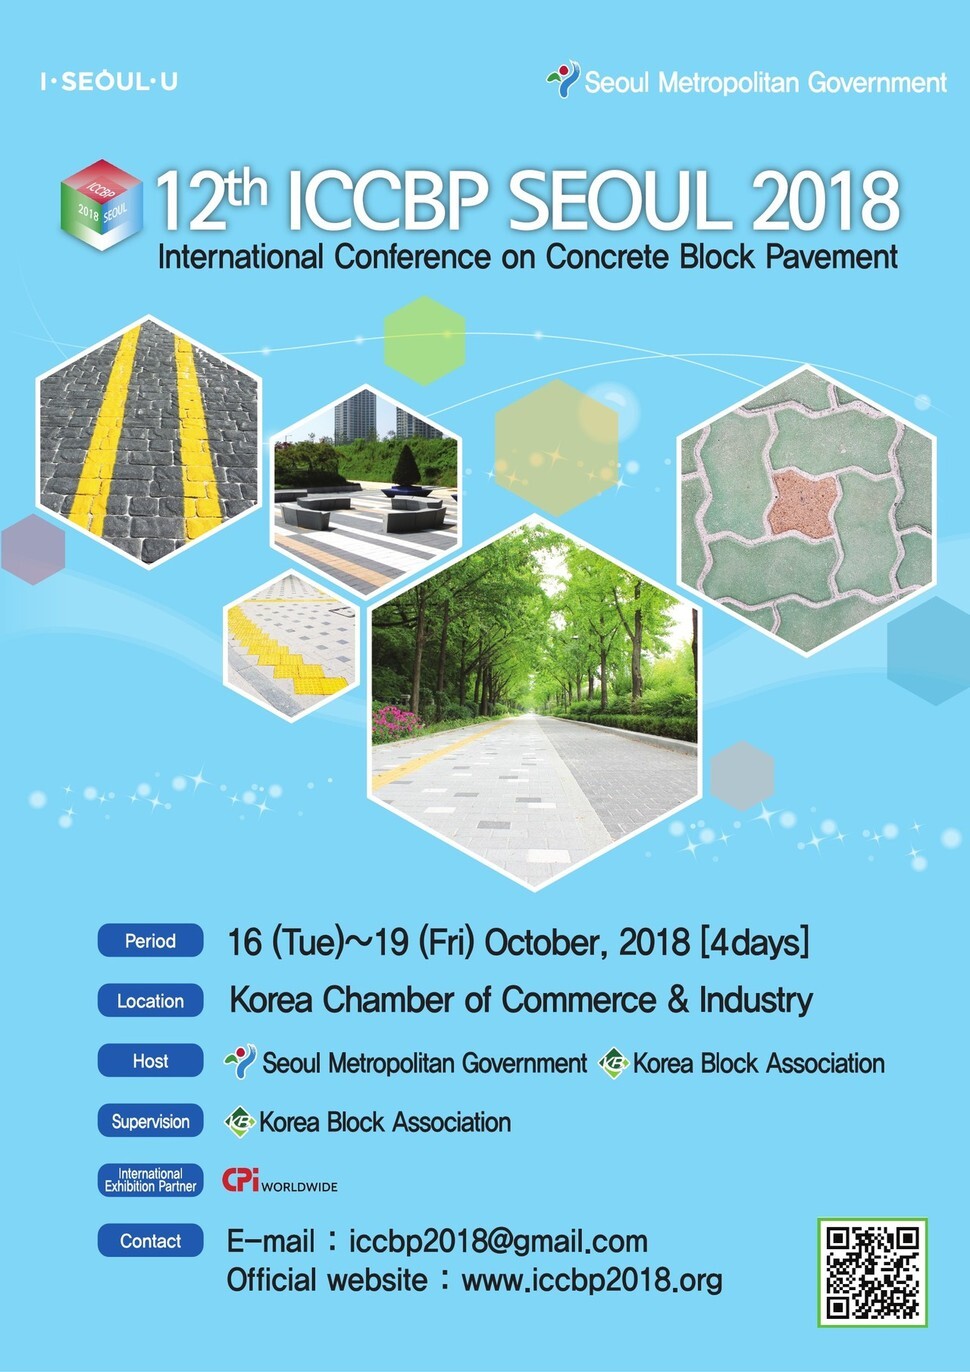 The official poster for the 12th ICCBP SEOUL 2018